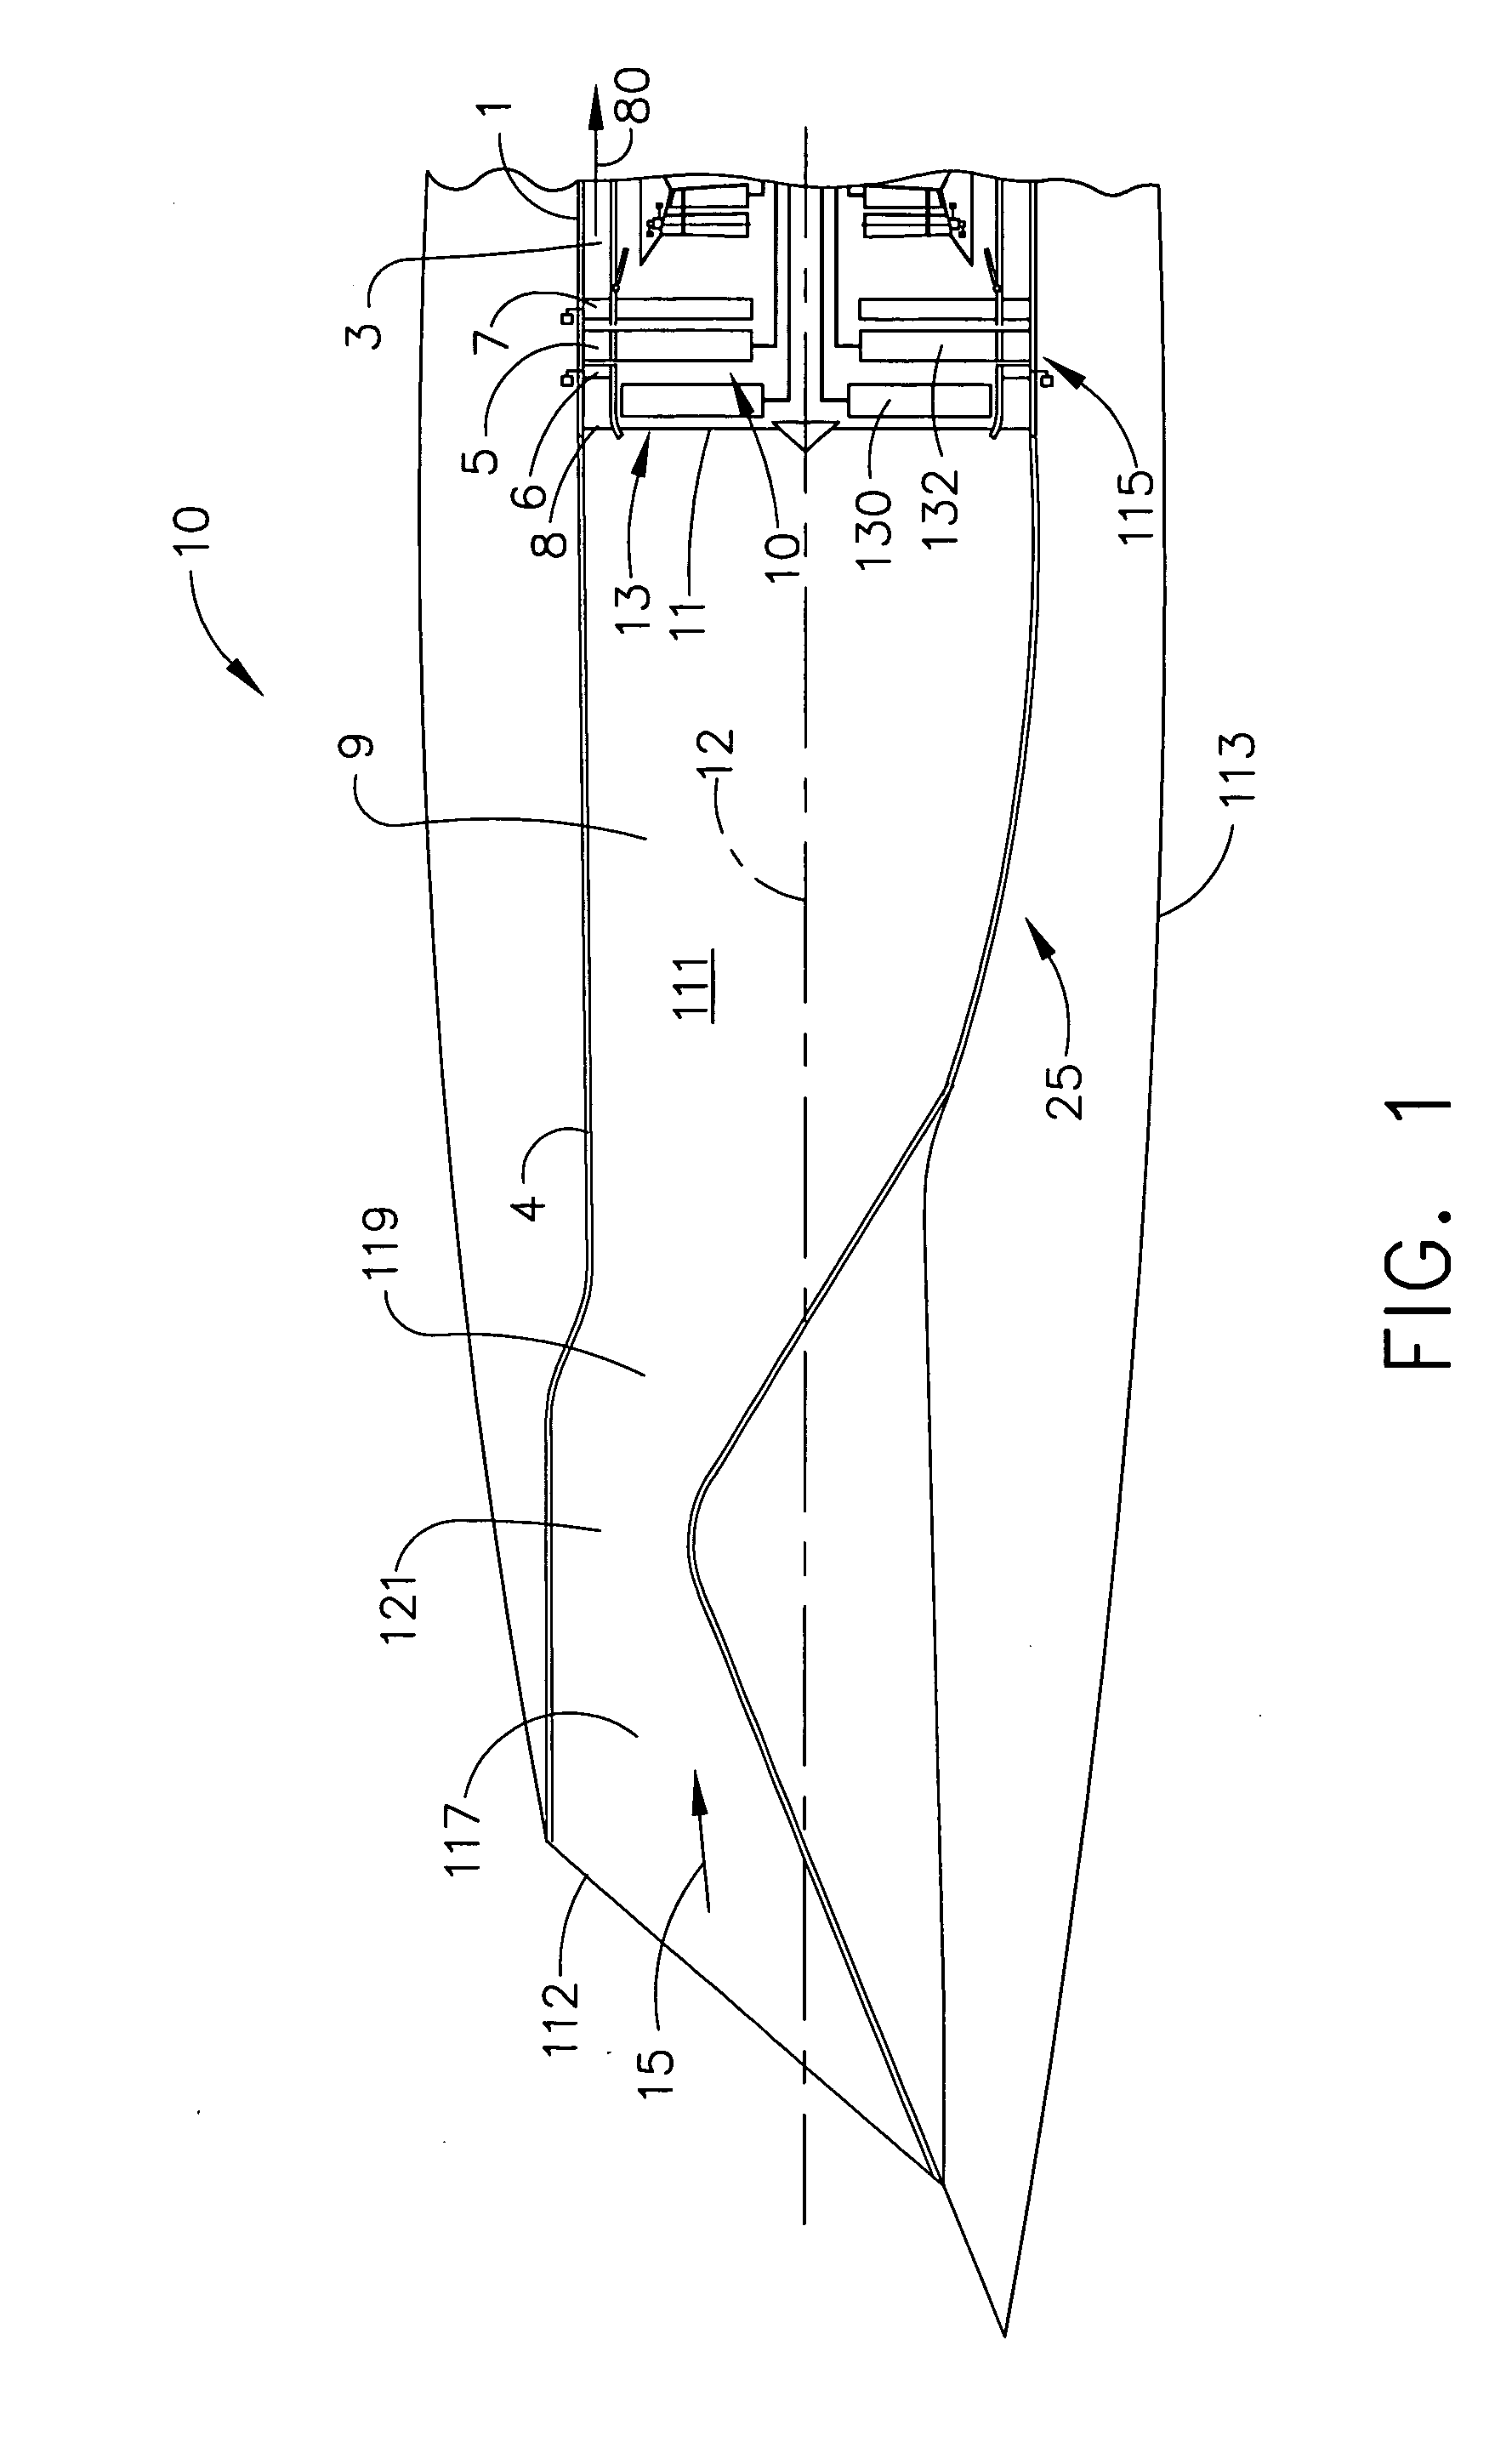 Flade gas turbine engine with fixed geometry inlet